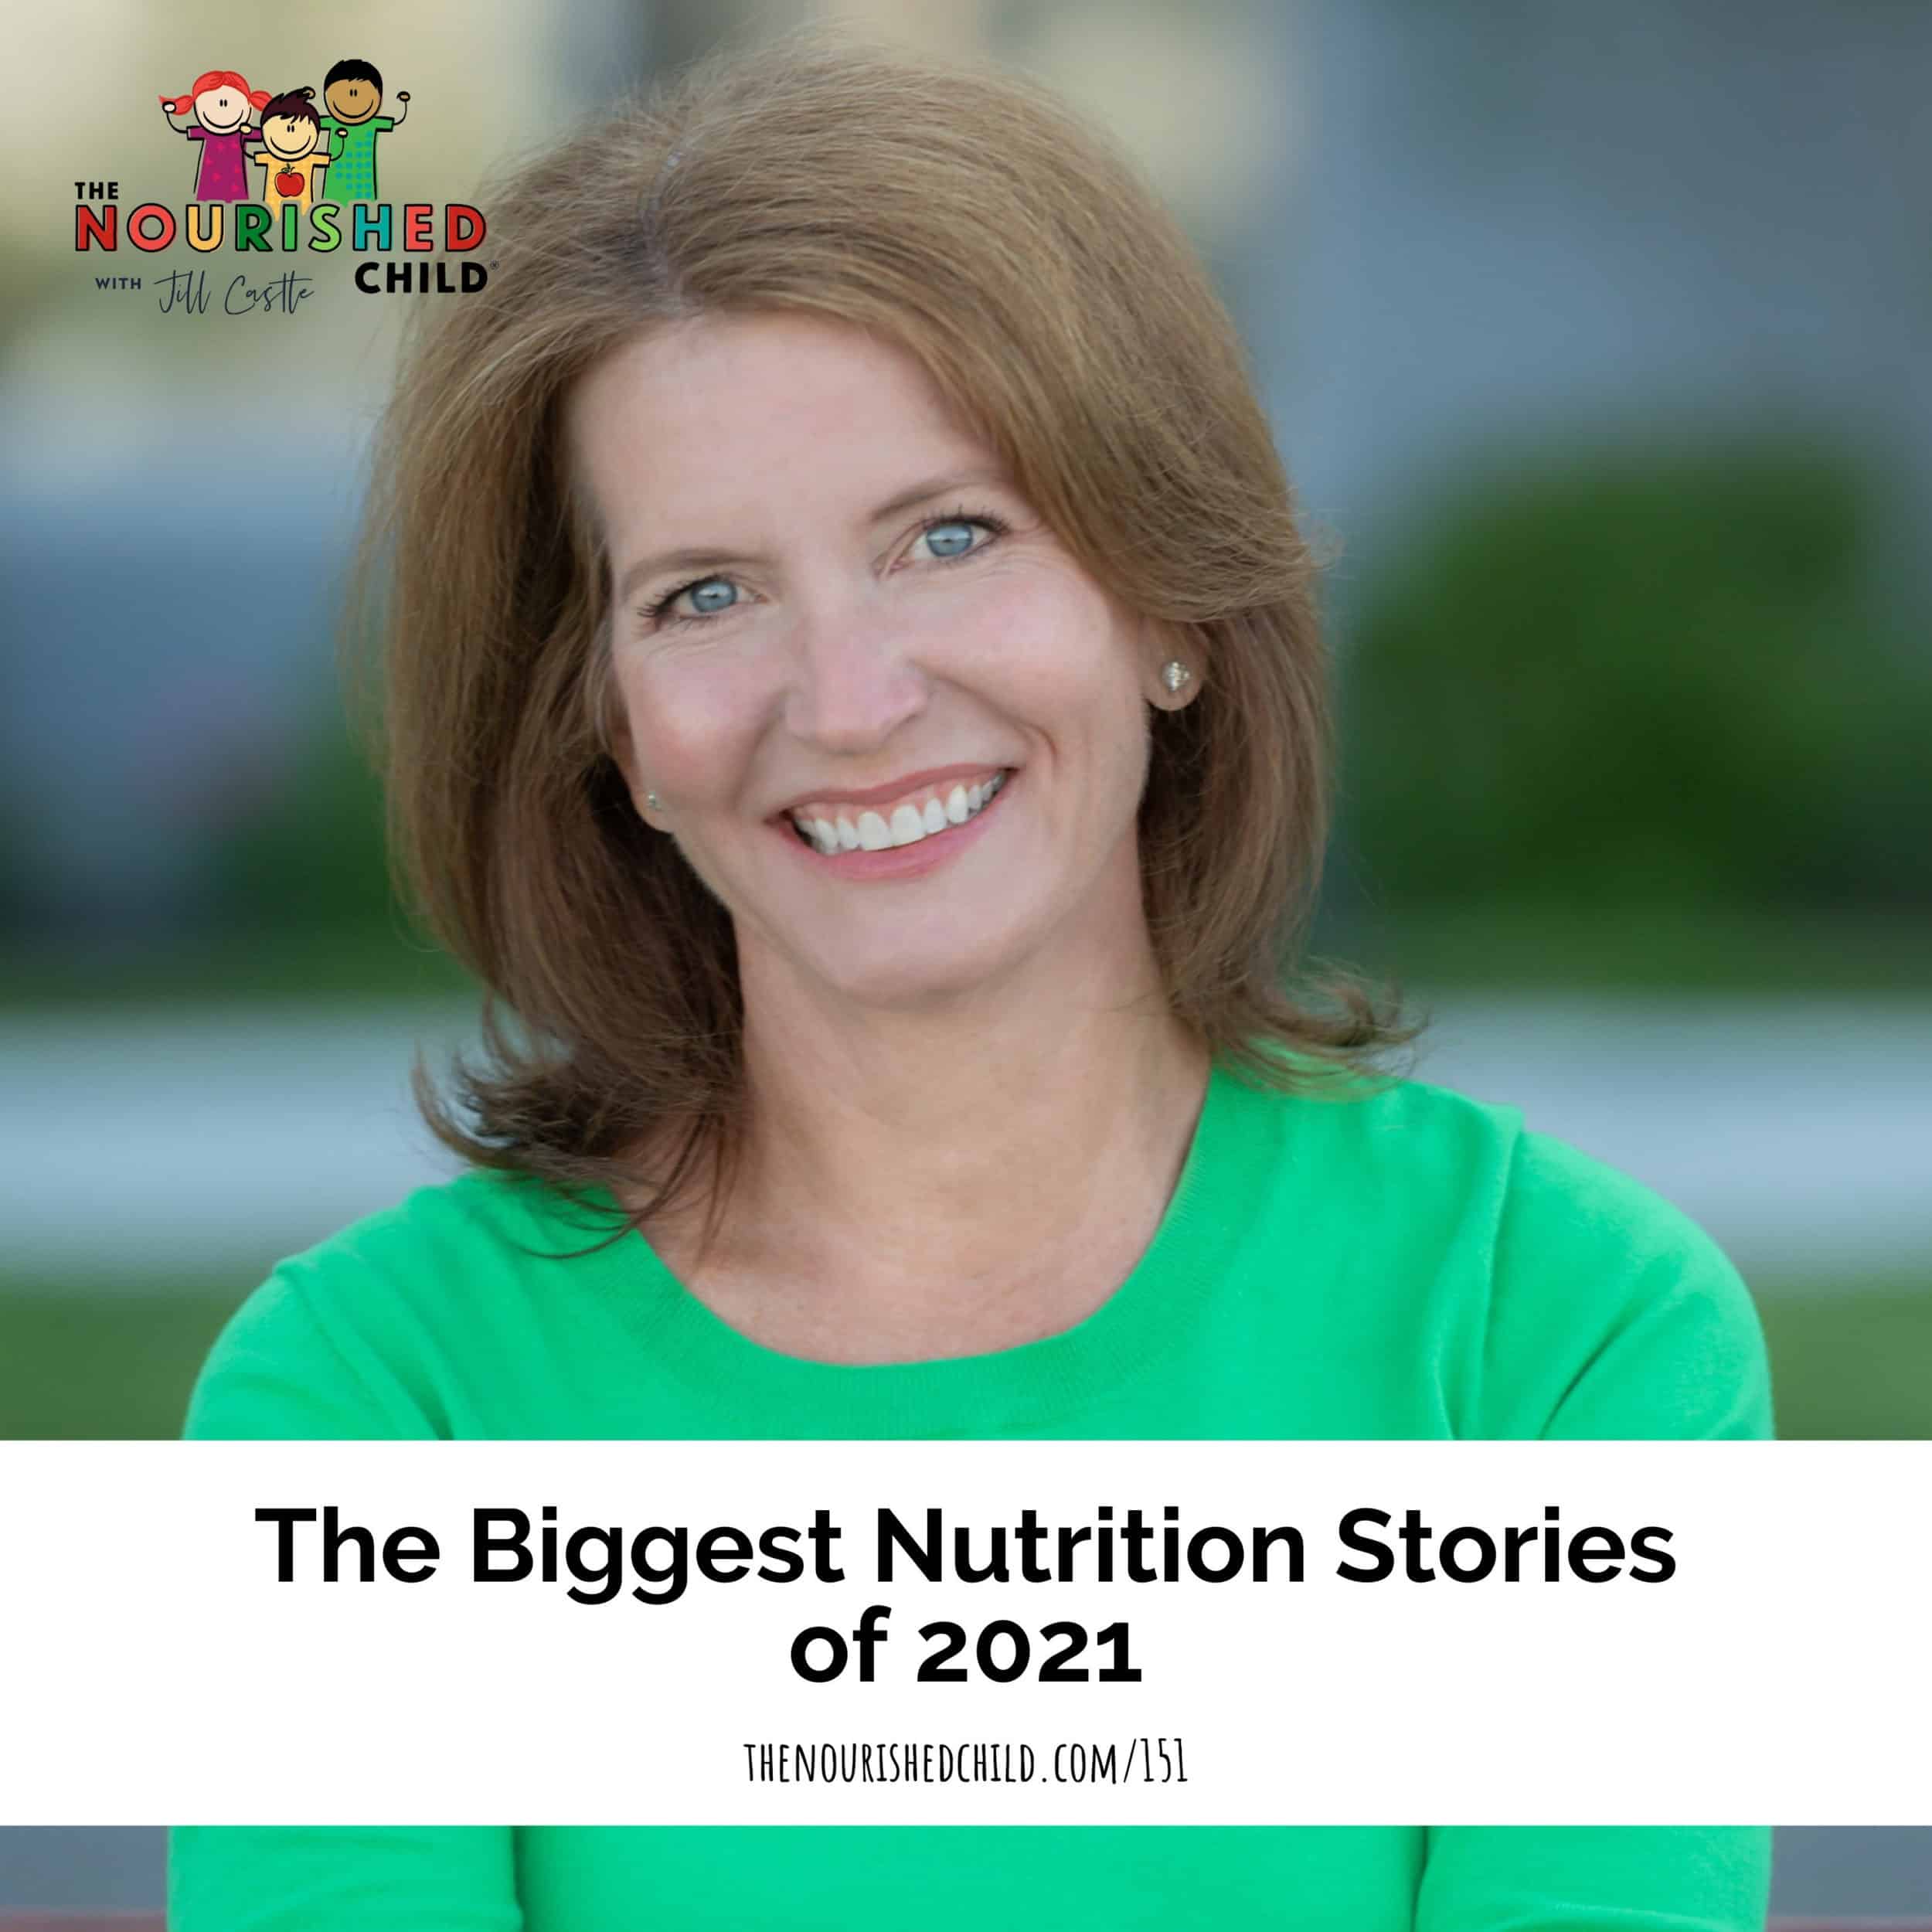 Jill Castle on The Nourished Child podcast